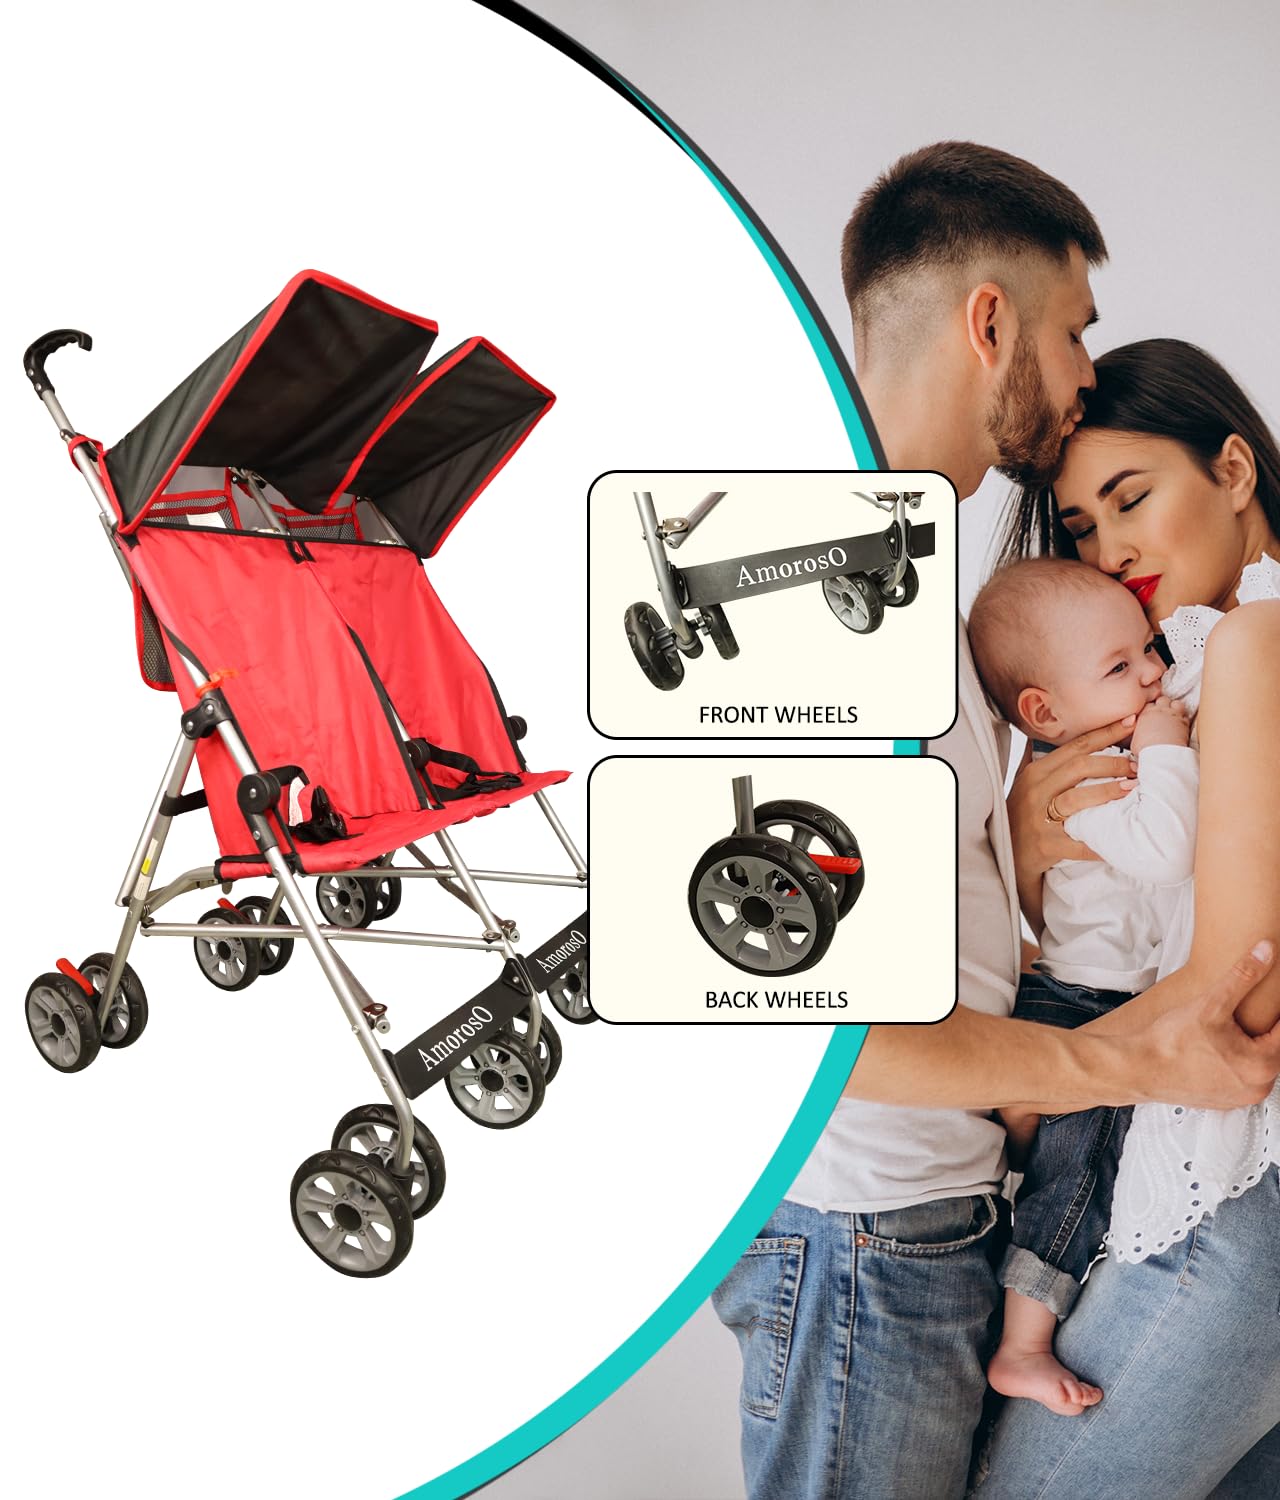 AmorosO Twin Lightweight Umbrella Stroller - Easy to Clean Stroller - Baby Stroller with Four Wheels - Travel-Ready Stroller - with Extra Storage - Sunlight and Light Rain Protection - Black